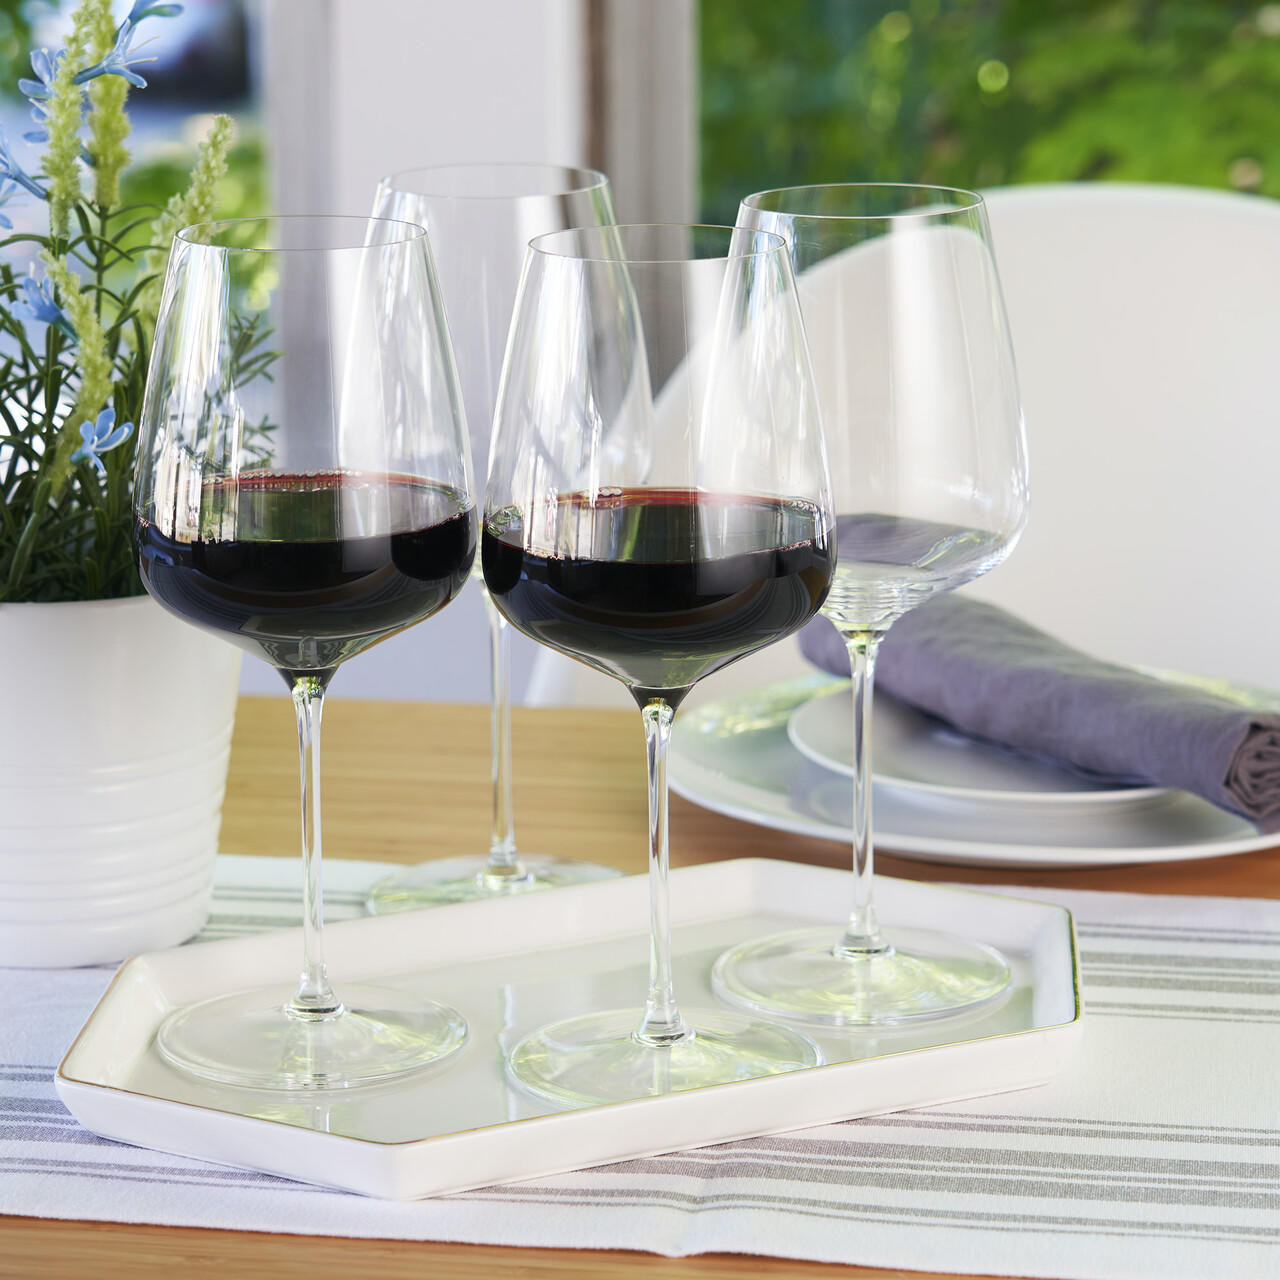 https://cdn11.bigcommerce.com/s-pa7lxgfduc/images/stencil/1280x1280/products/571/2586/marnamaria-purveyors-and-co-spiegelau-willsberger-22.4-oz-bordeaux-glass-set-of-4__55426.1643707167.jpg?c=1